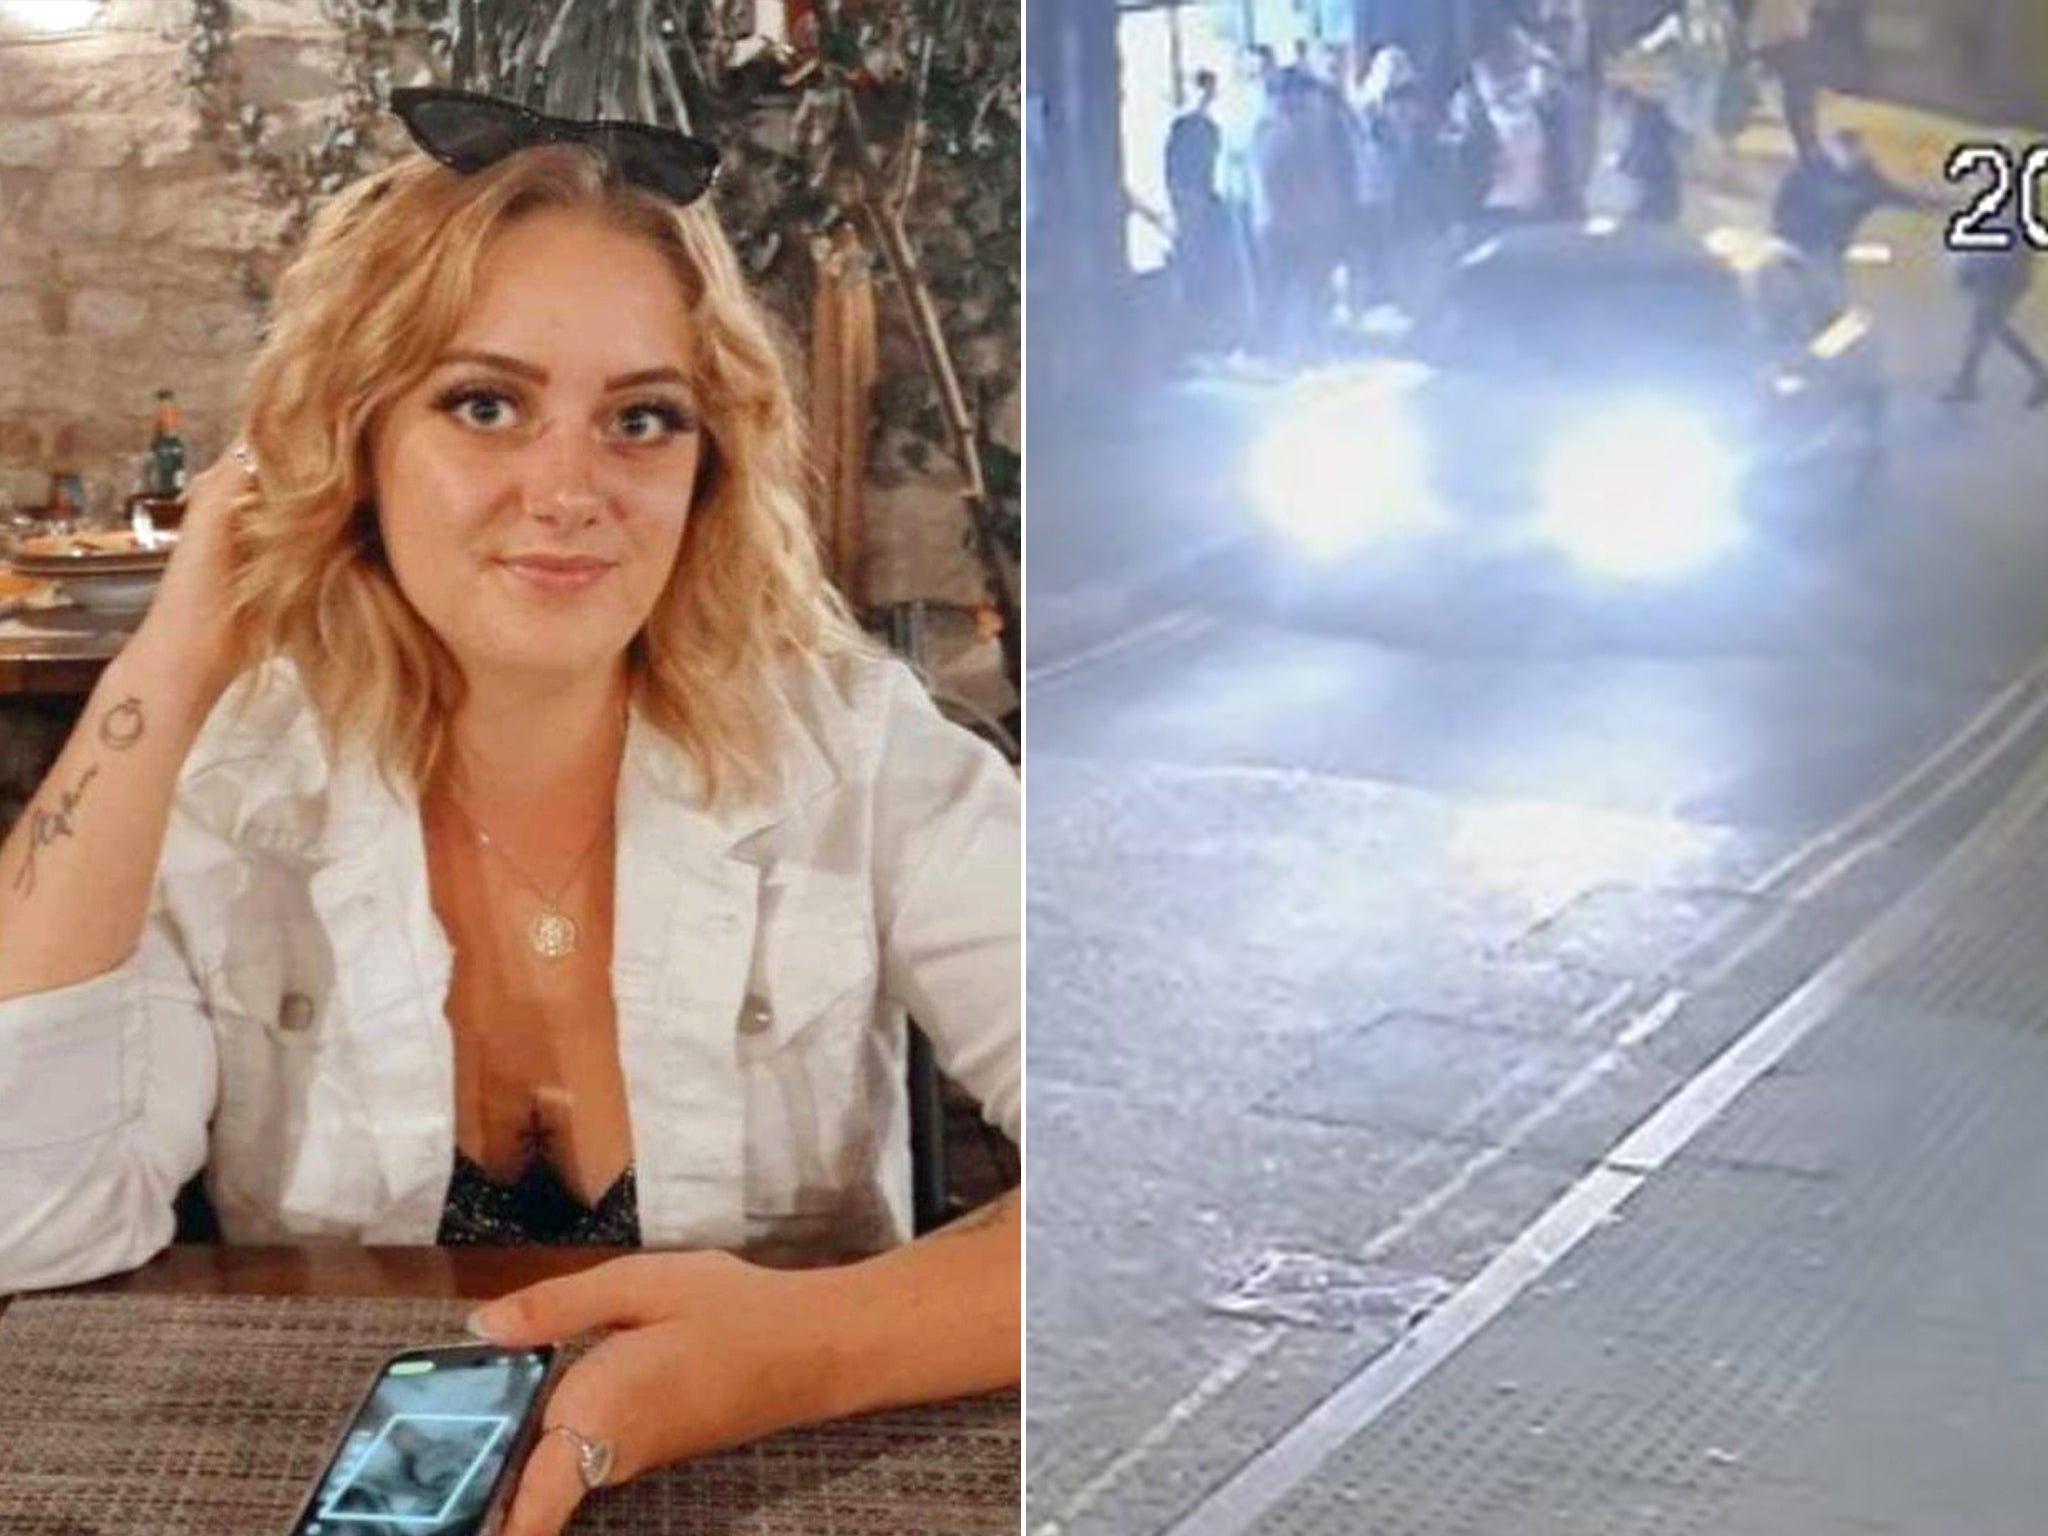 Rebecca Steer died of ‘catastrophic’ injuries after Stephen McHugh drove into a crowd of pedestrians